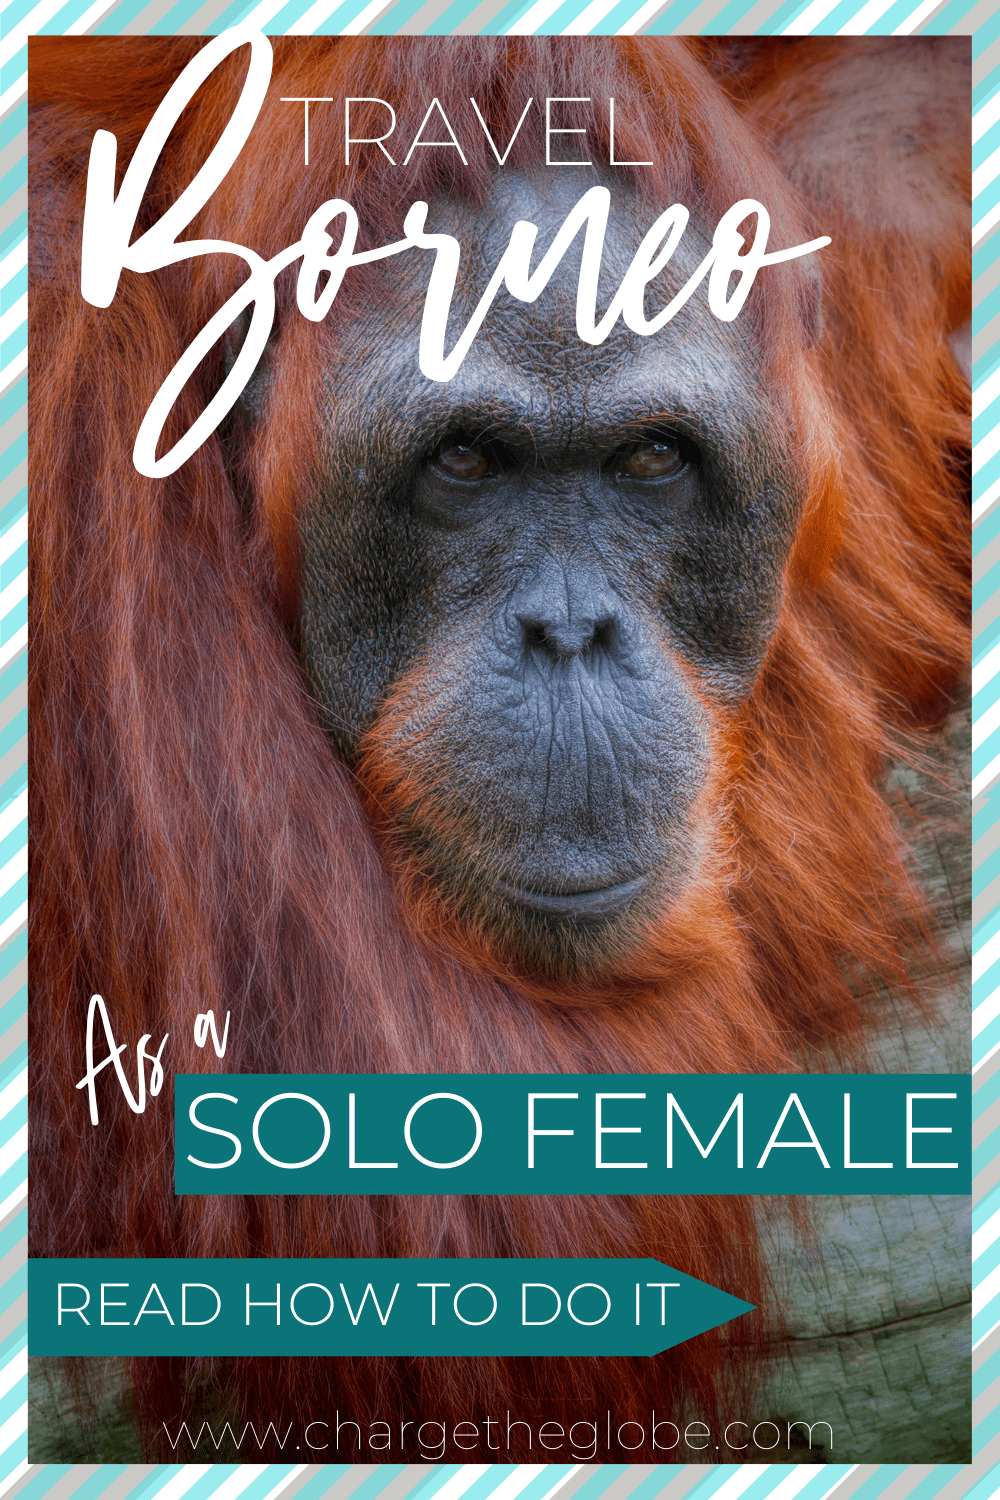 Borneo is a great place to travel solo as a woman on the road